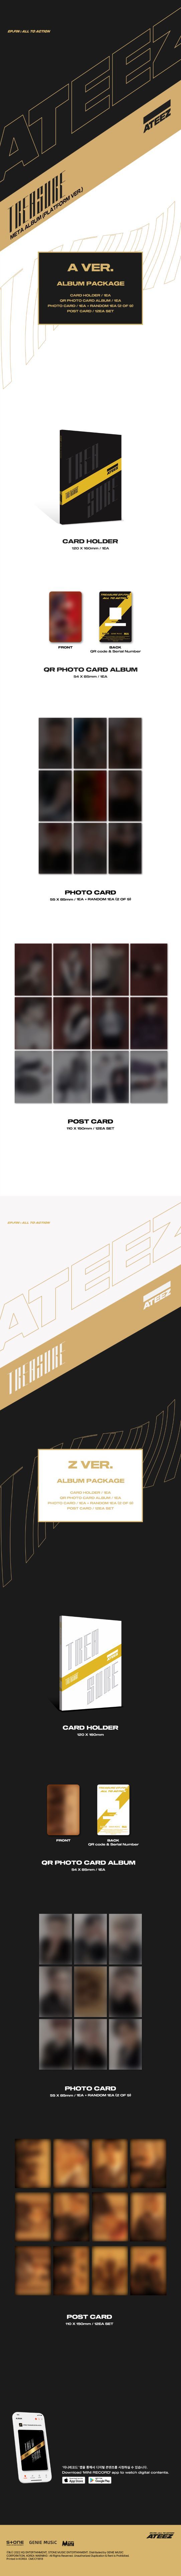 0ateez-all-to-action-platform